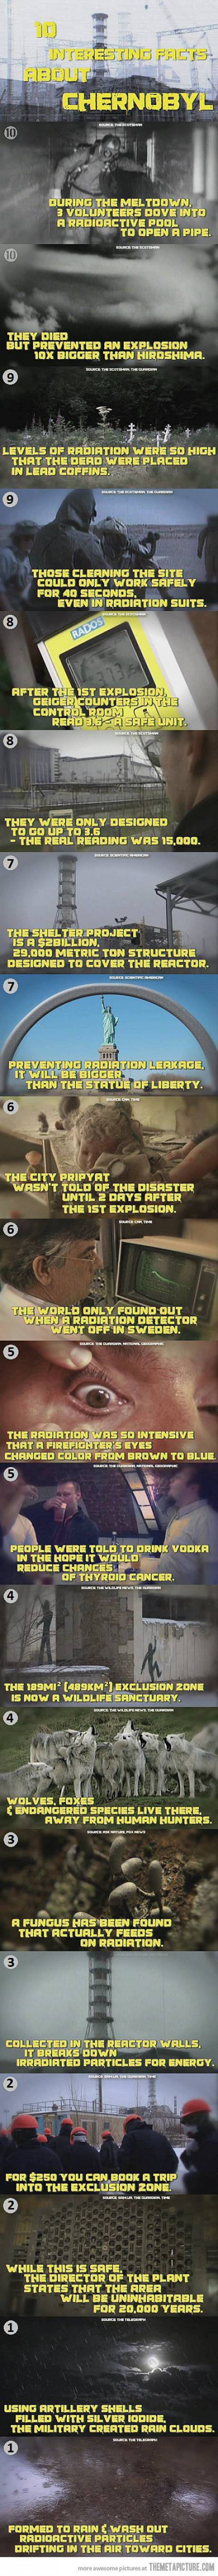 10 Facts About Chernobyl That Will Creep You Out Completelly